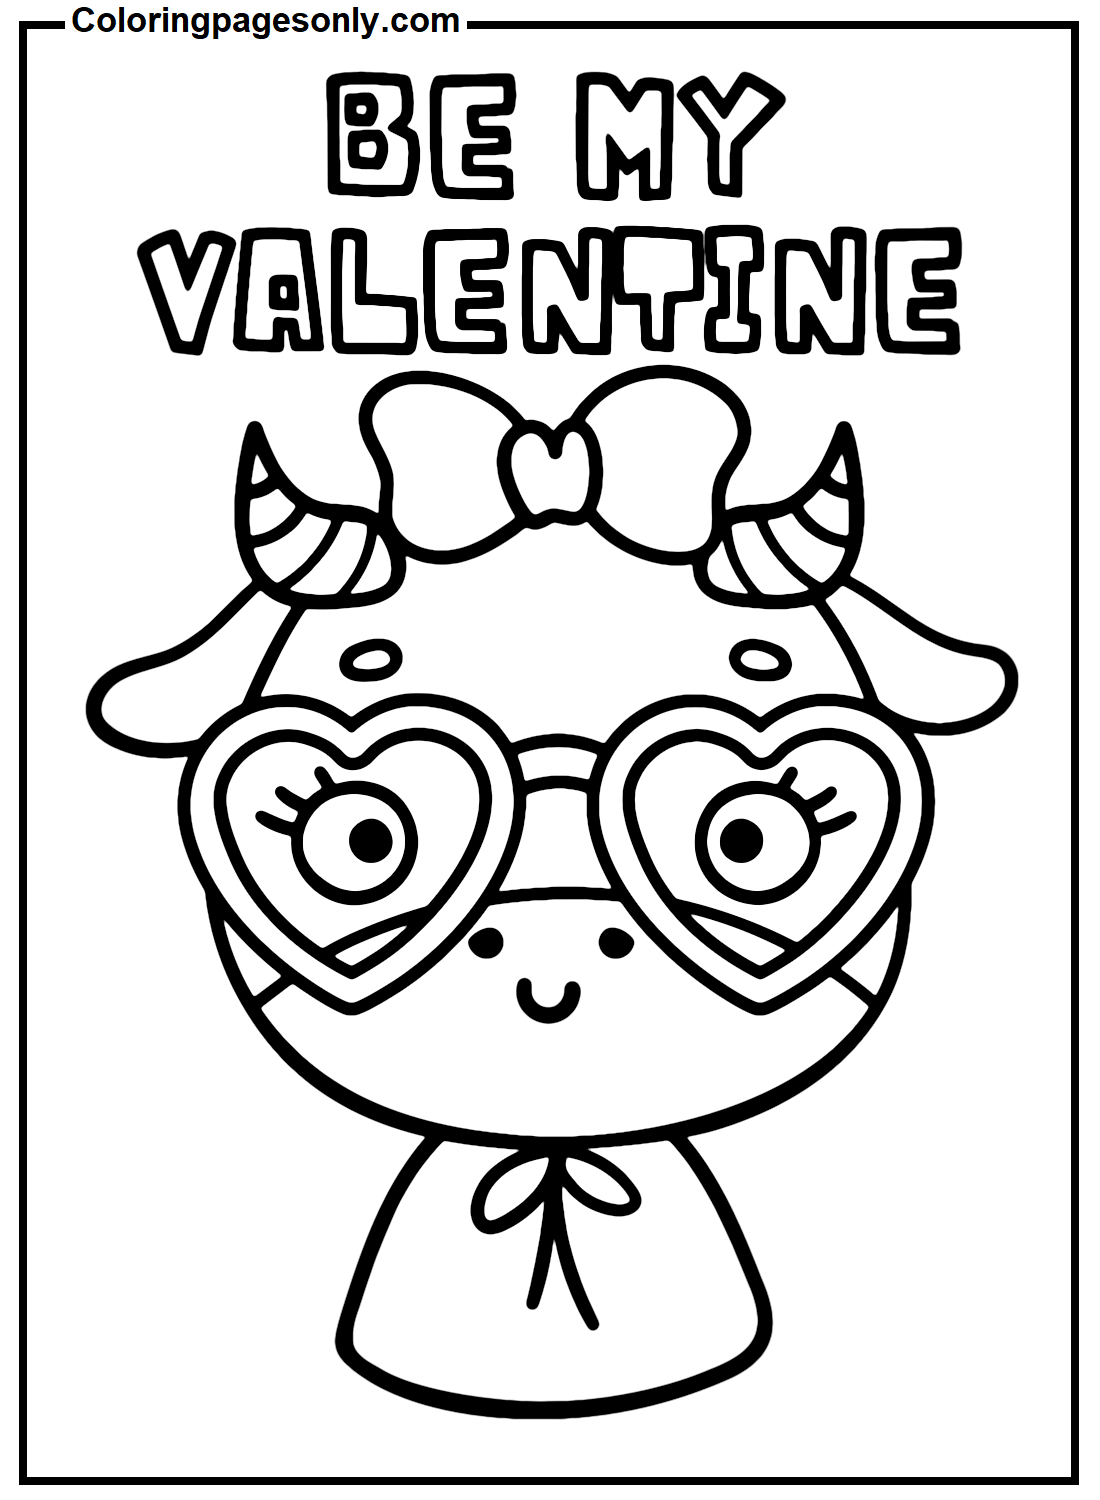 Cute Cow In Valentine's Day Coloring Pages